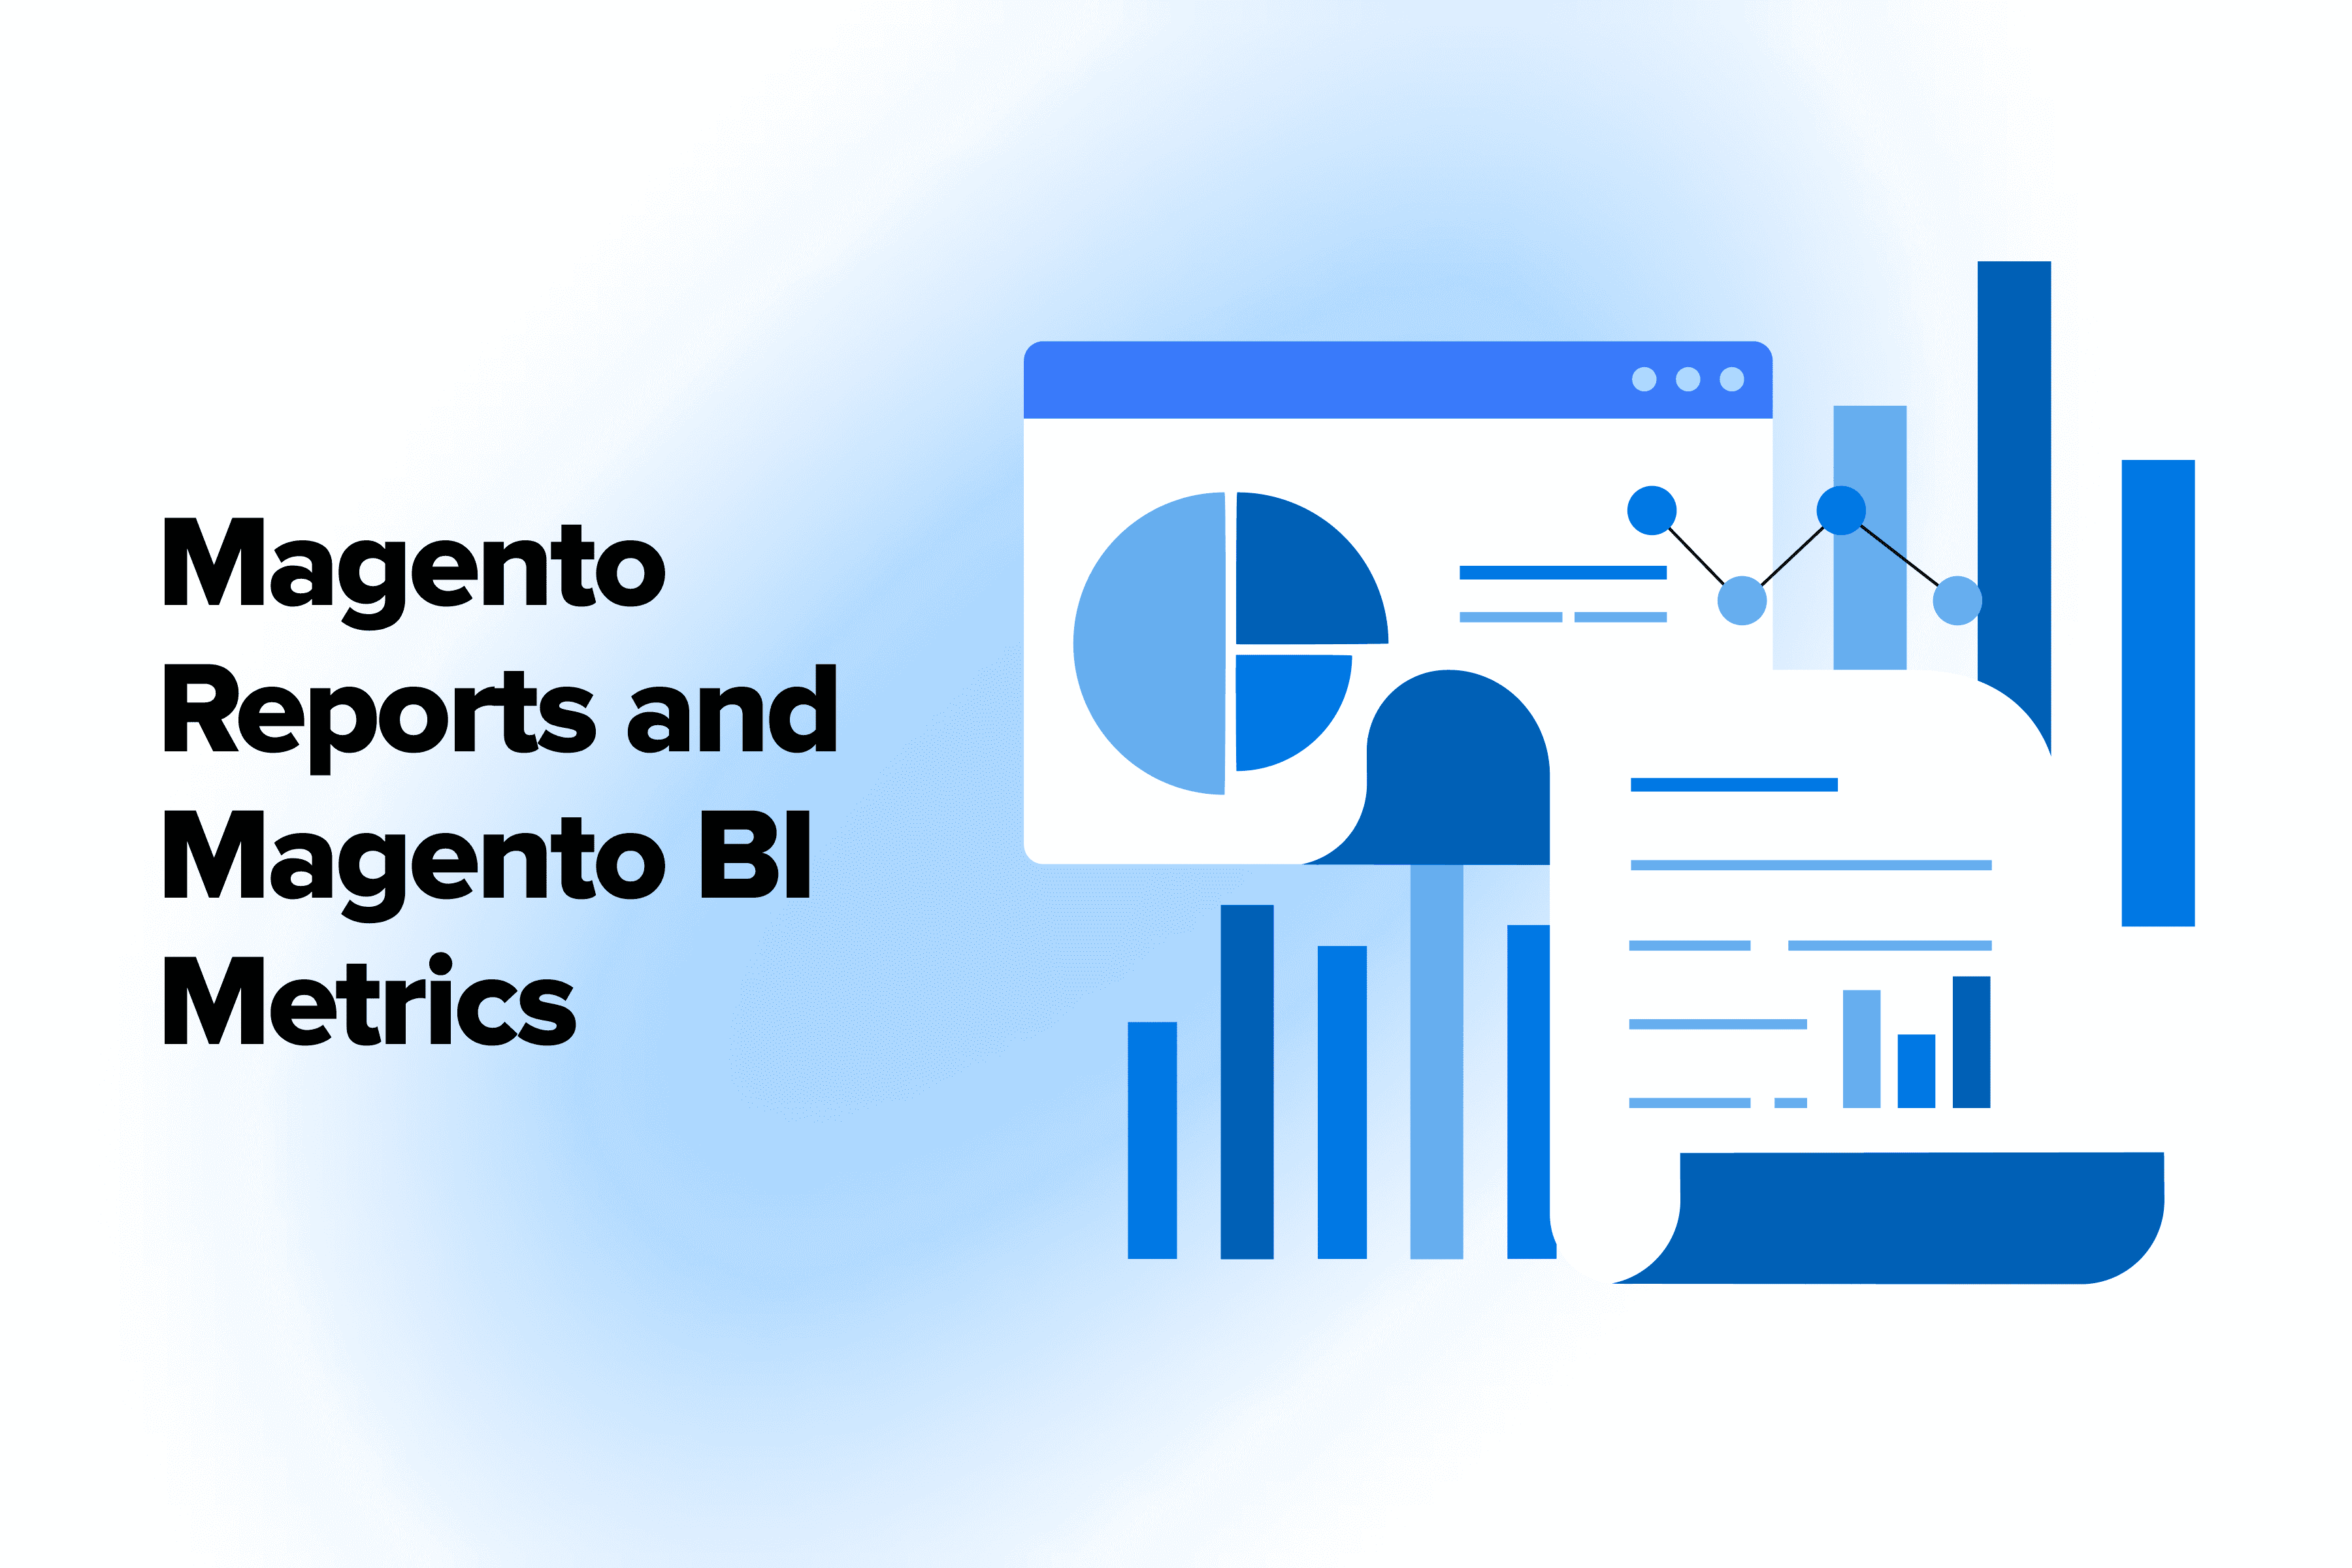 Magento Reports and Magento BI Metrics: You Sell More When You Know More